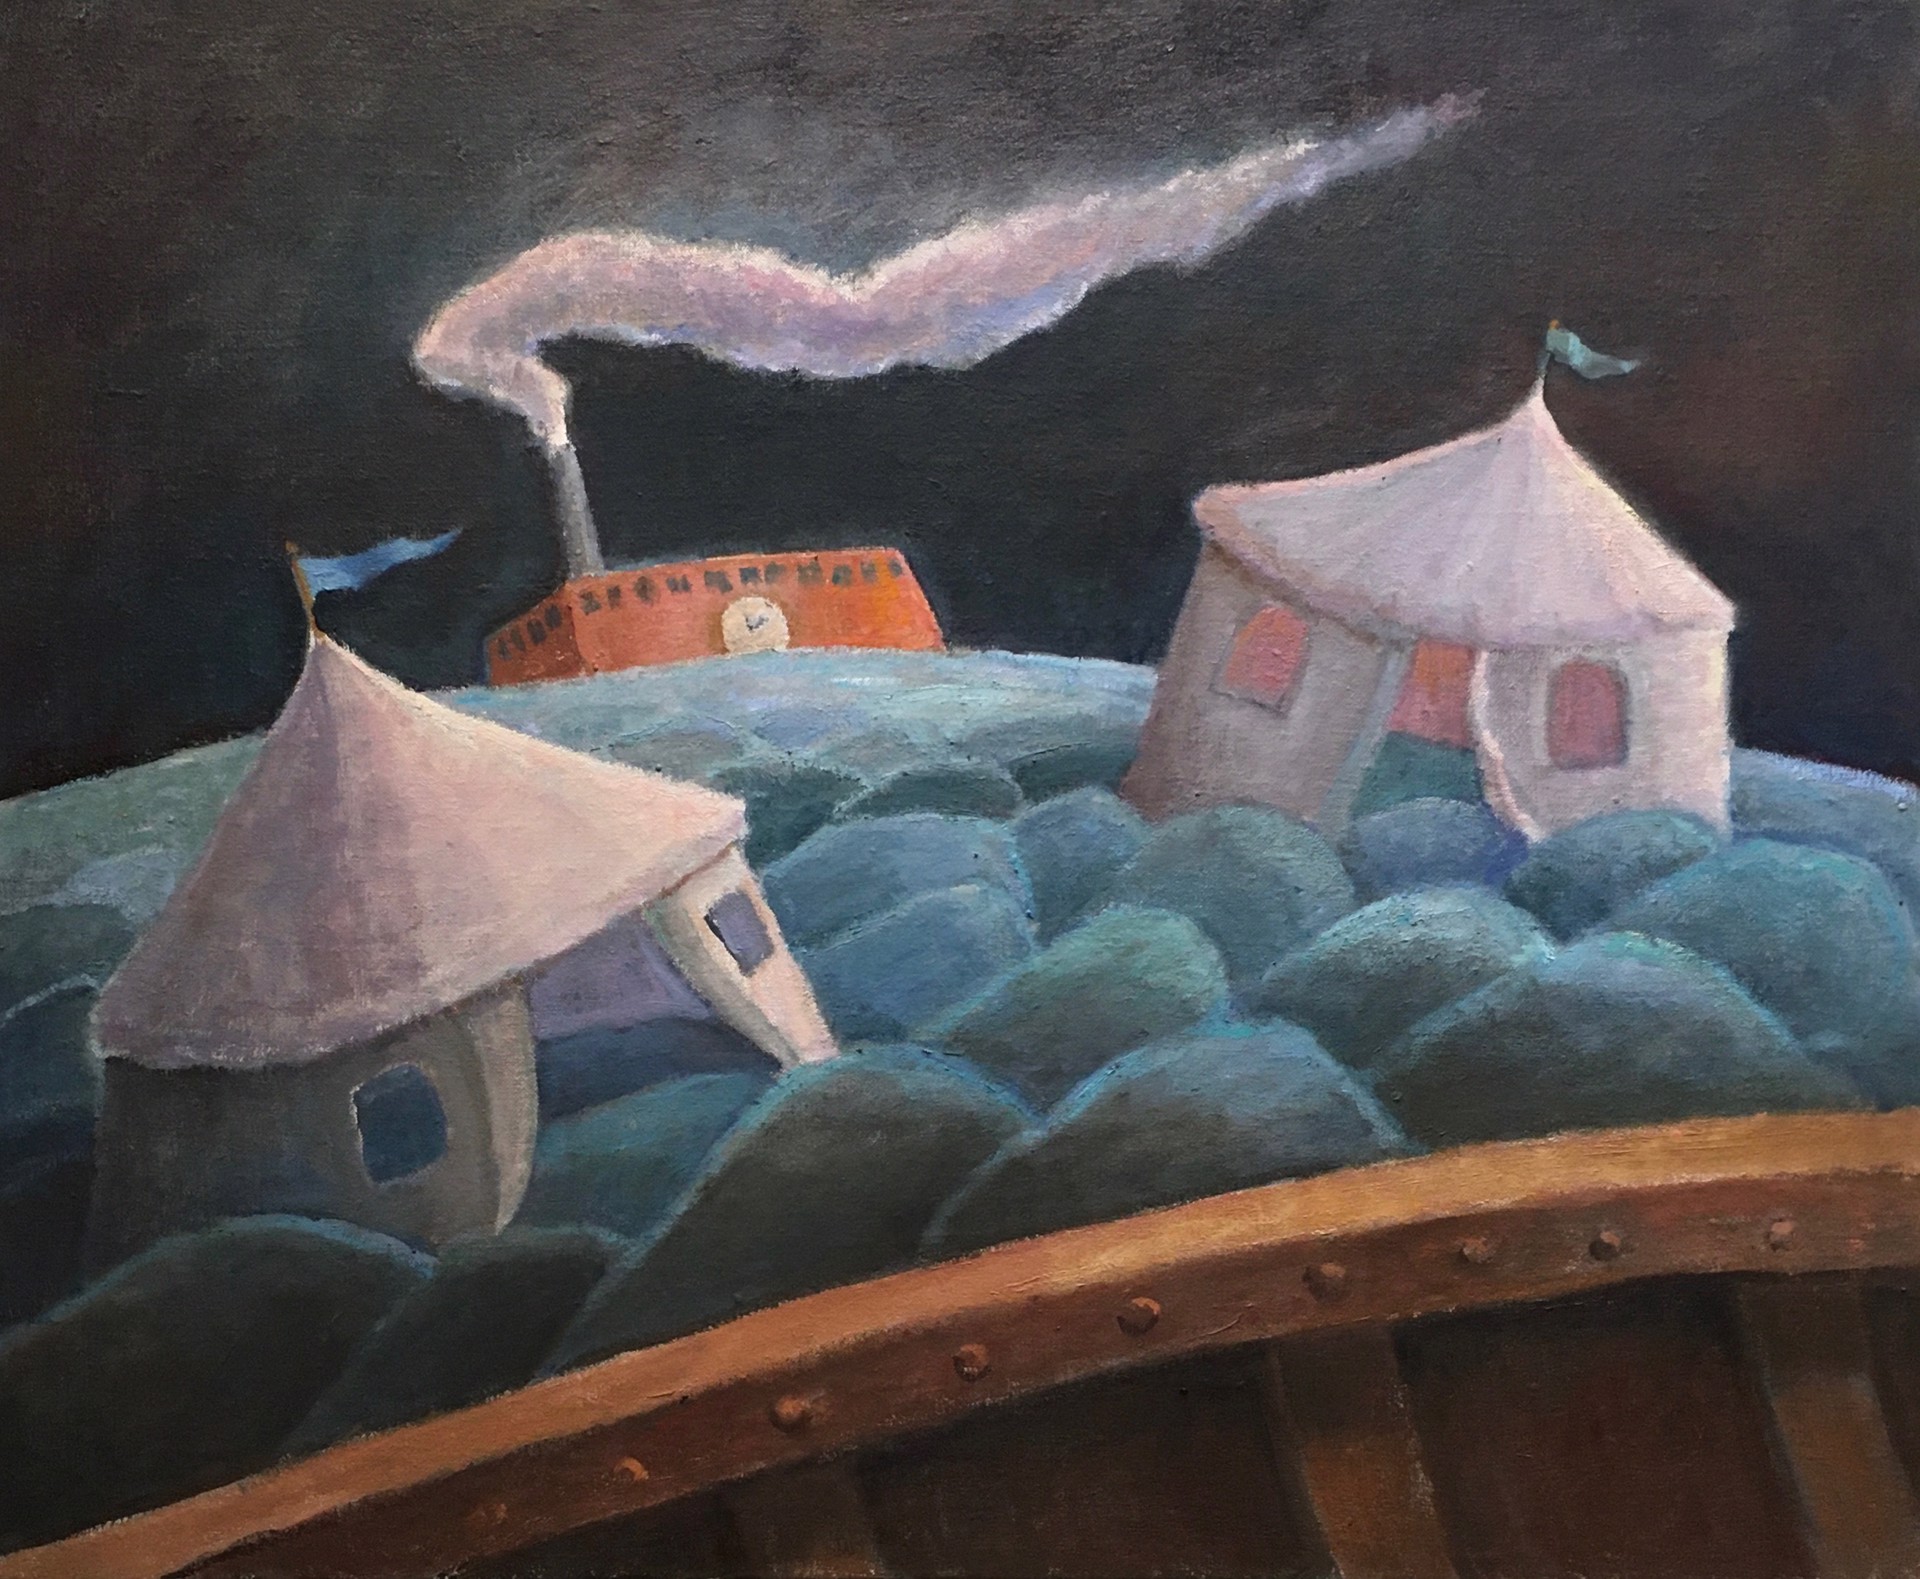 Lifeboat by Stephanie Frank Sassoon